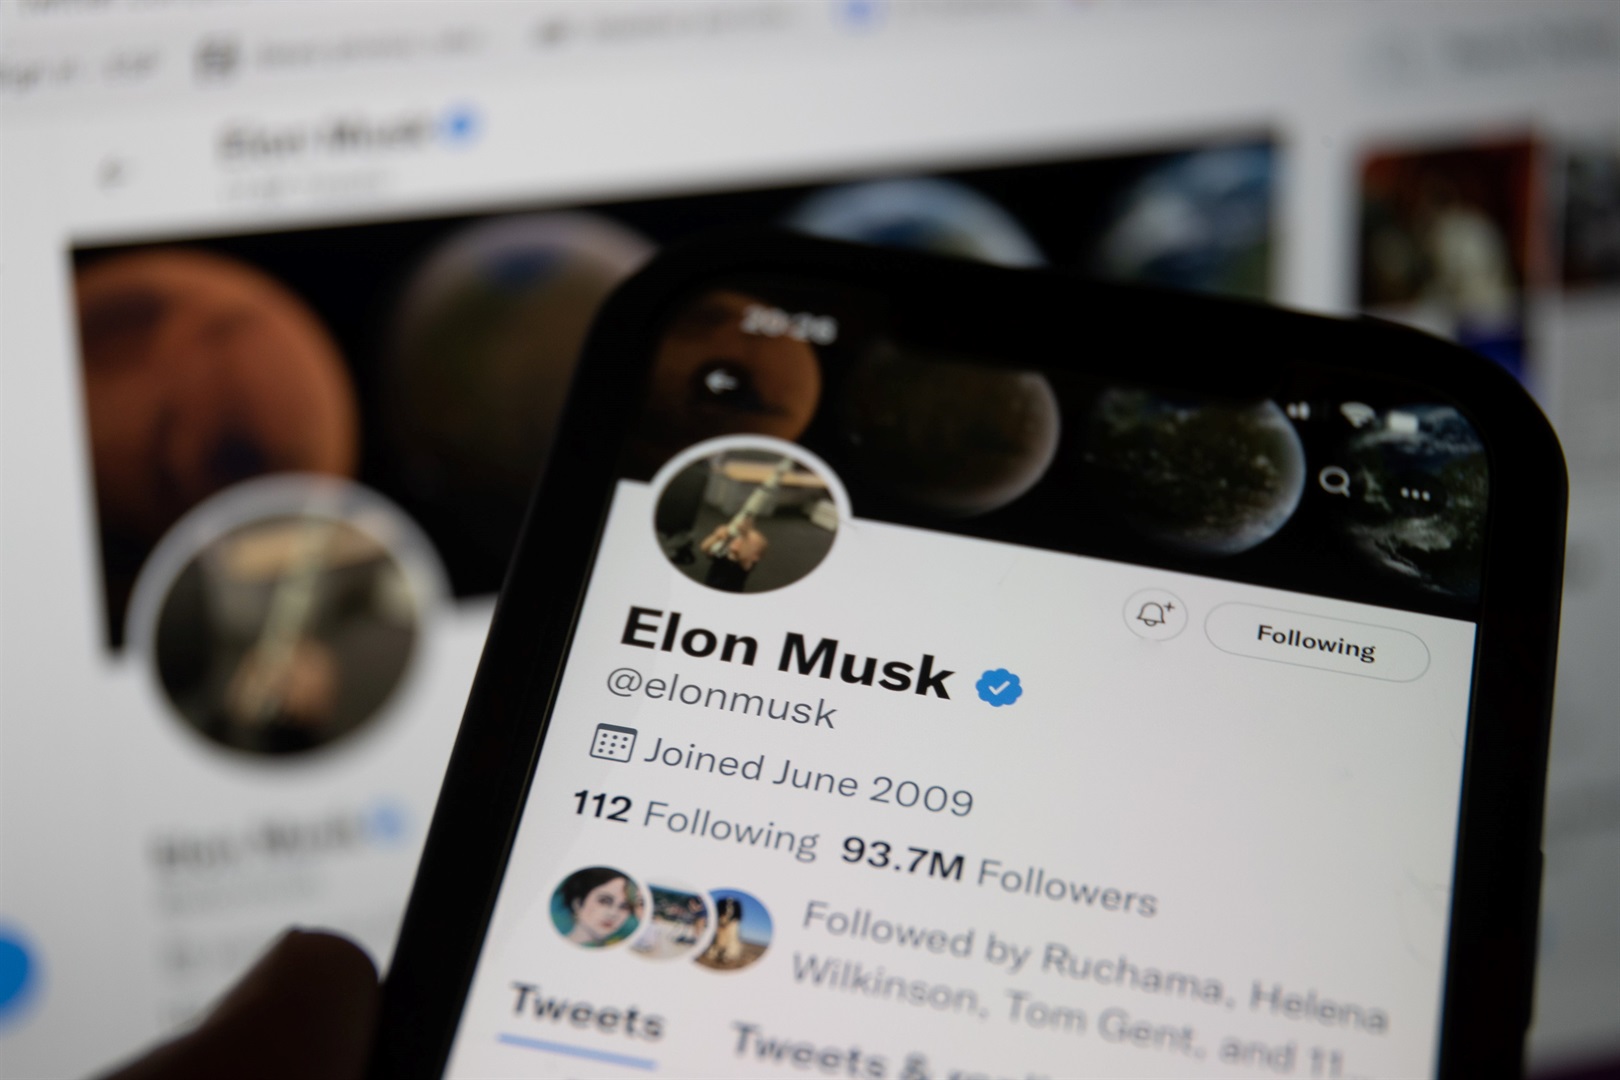 Elon Musk's vision for Twitter includes allowing users to turn on setting that blocks offensive comments